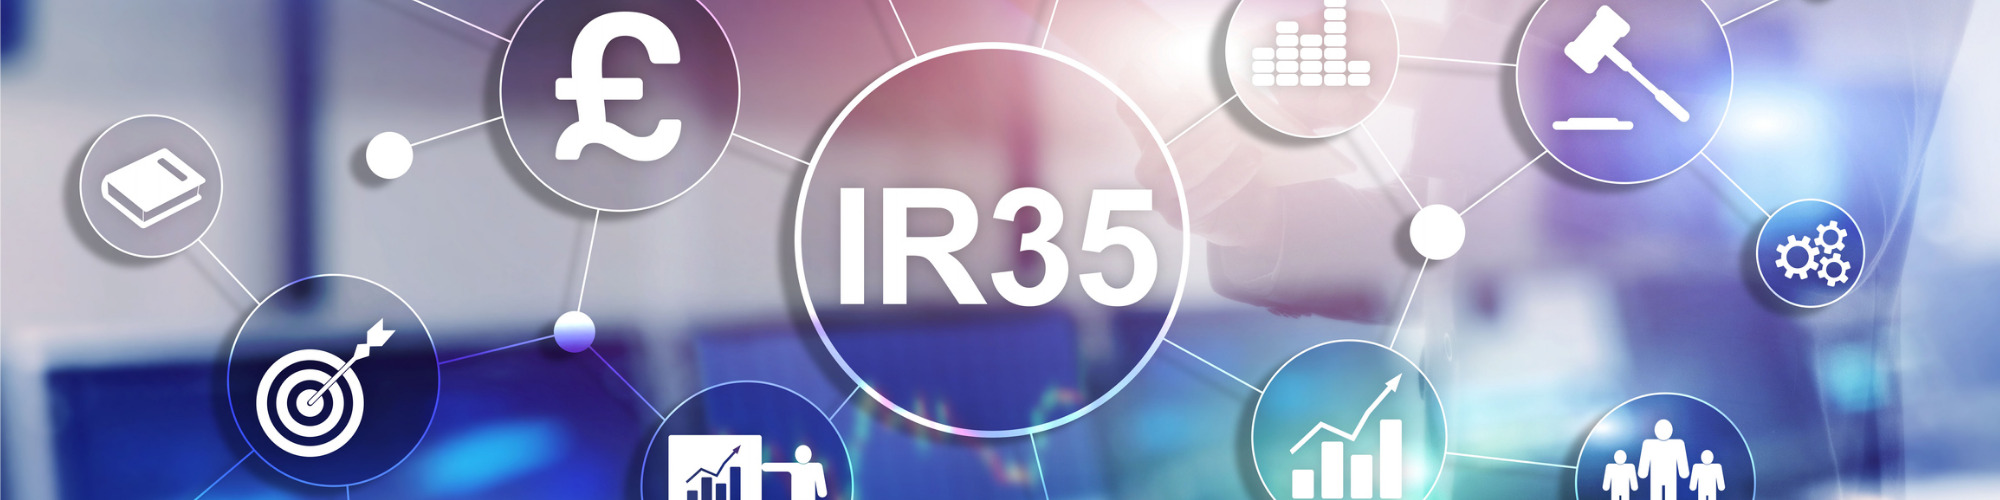 IR35 & Employment Status - Tax Tests Explained 